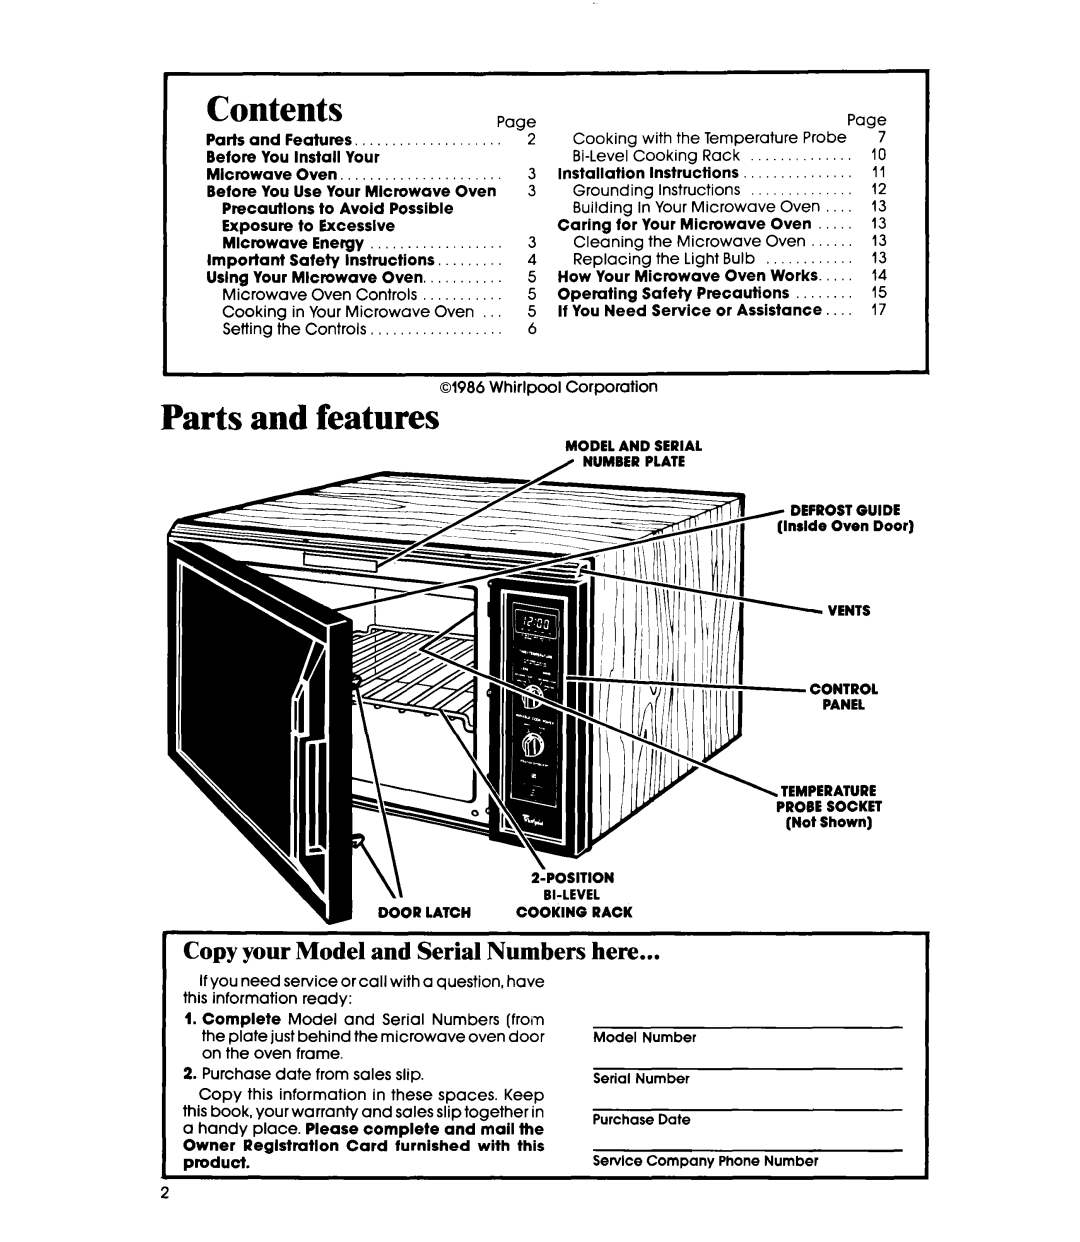 Whirlpool Microwace Oven manual Contents, Parts and features, I COPYYour Model and Serial Numbers here 